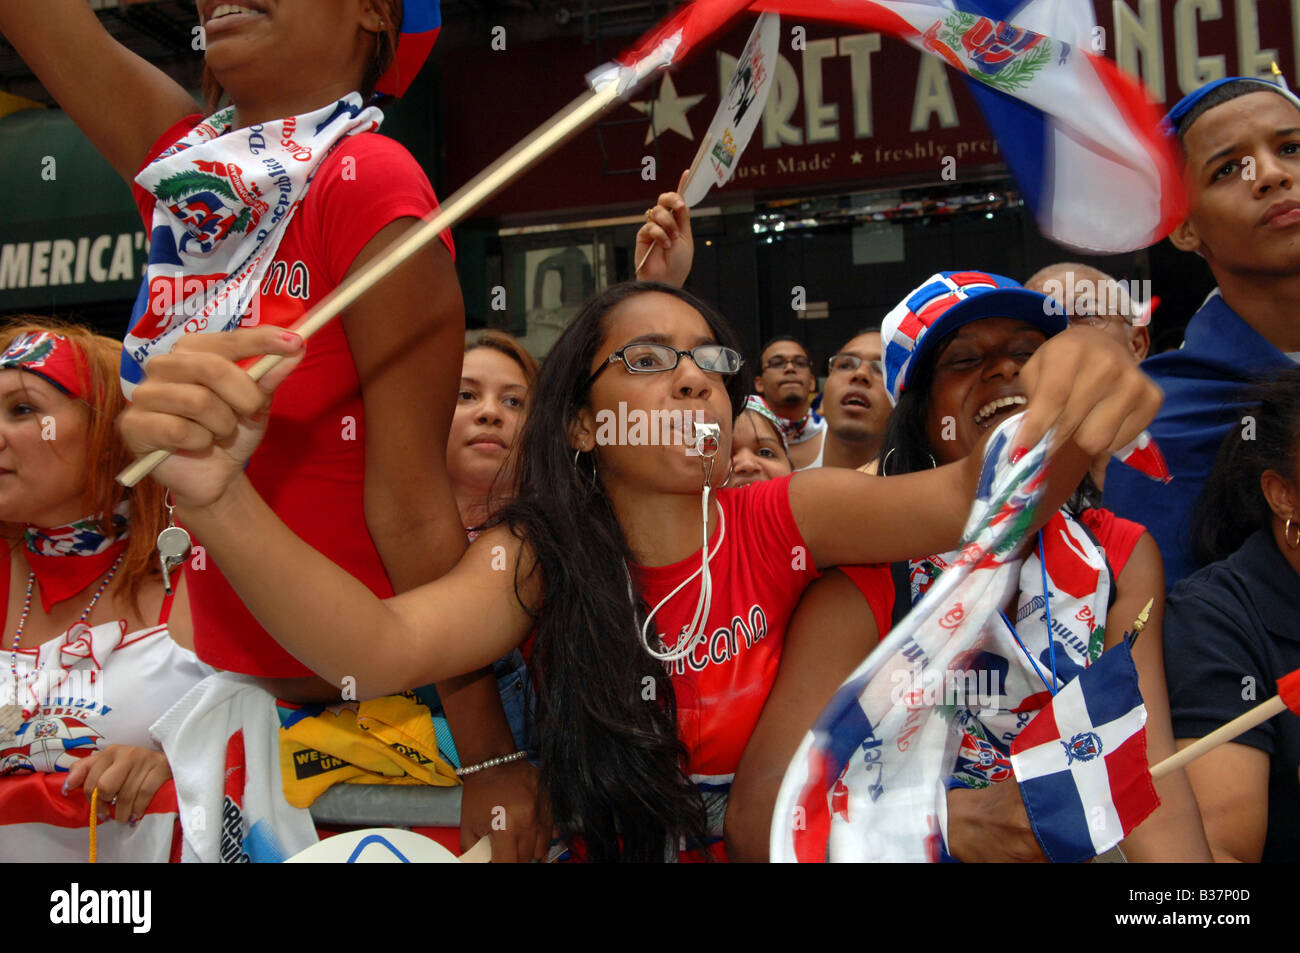 Thousands of Dominican Americans and supporters celebrate at the annual Dominican Independence Day Parade in NYC Stock Photo